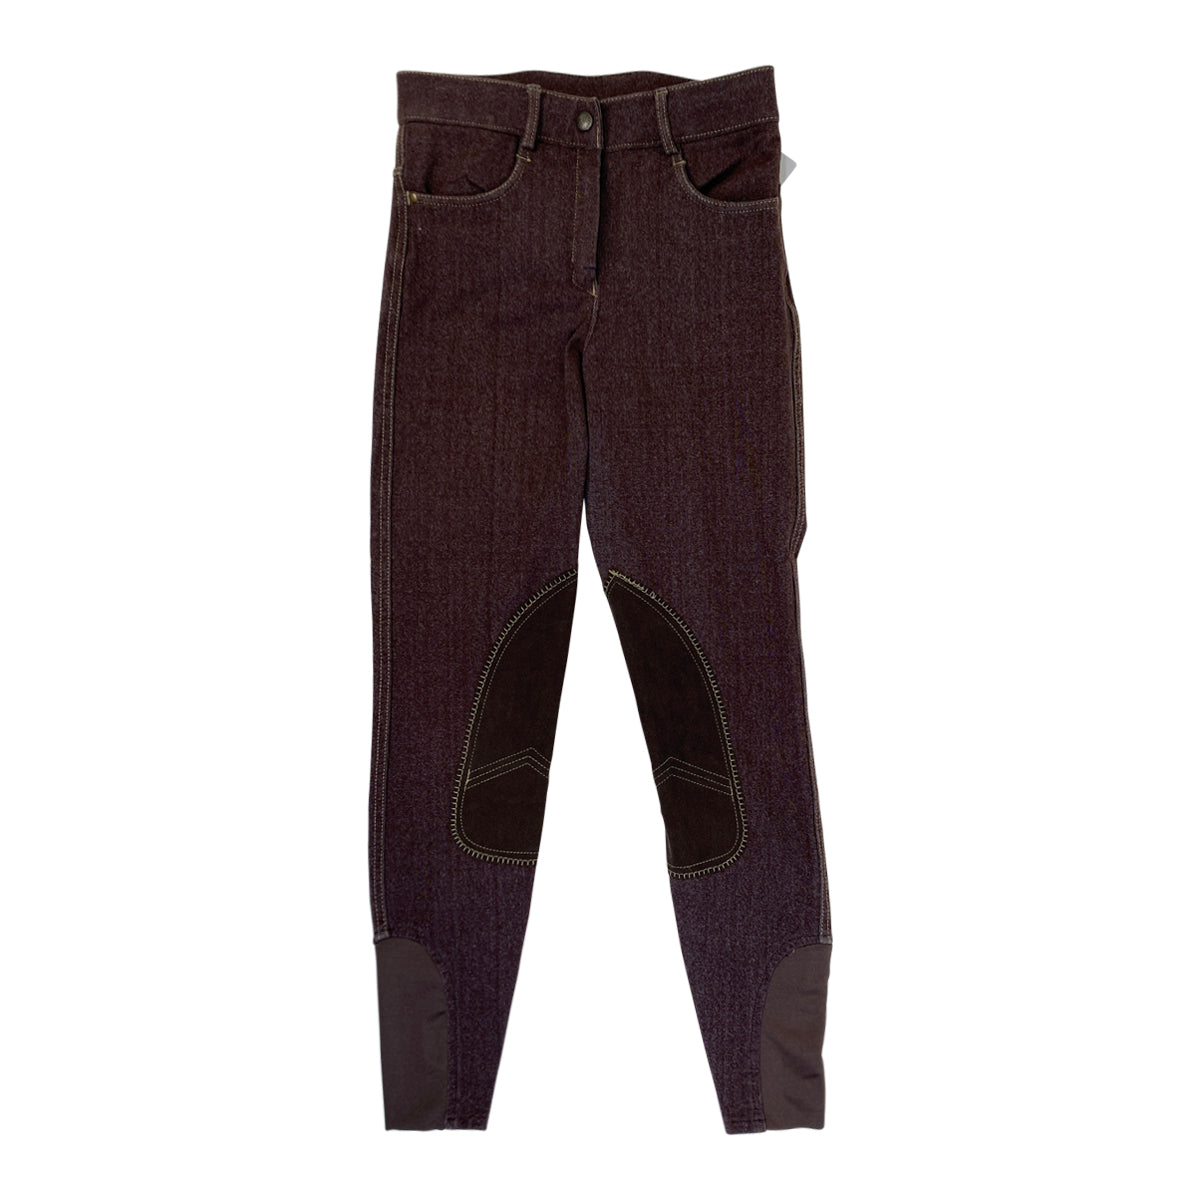 Ovation 'SoftFlex' Knee Patch Breeches in Brown